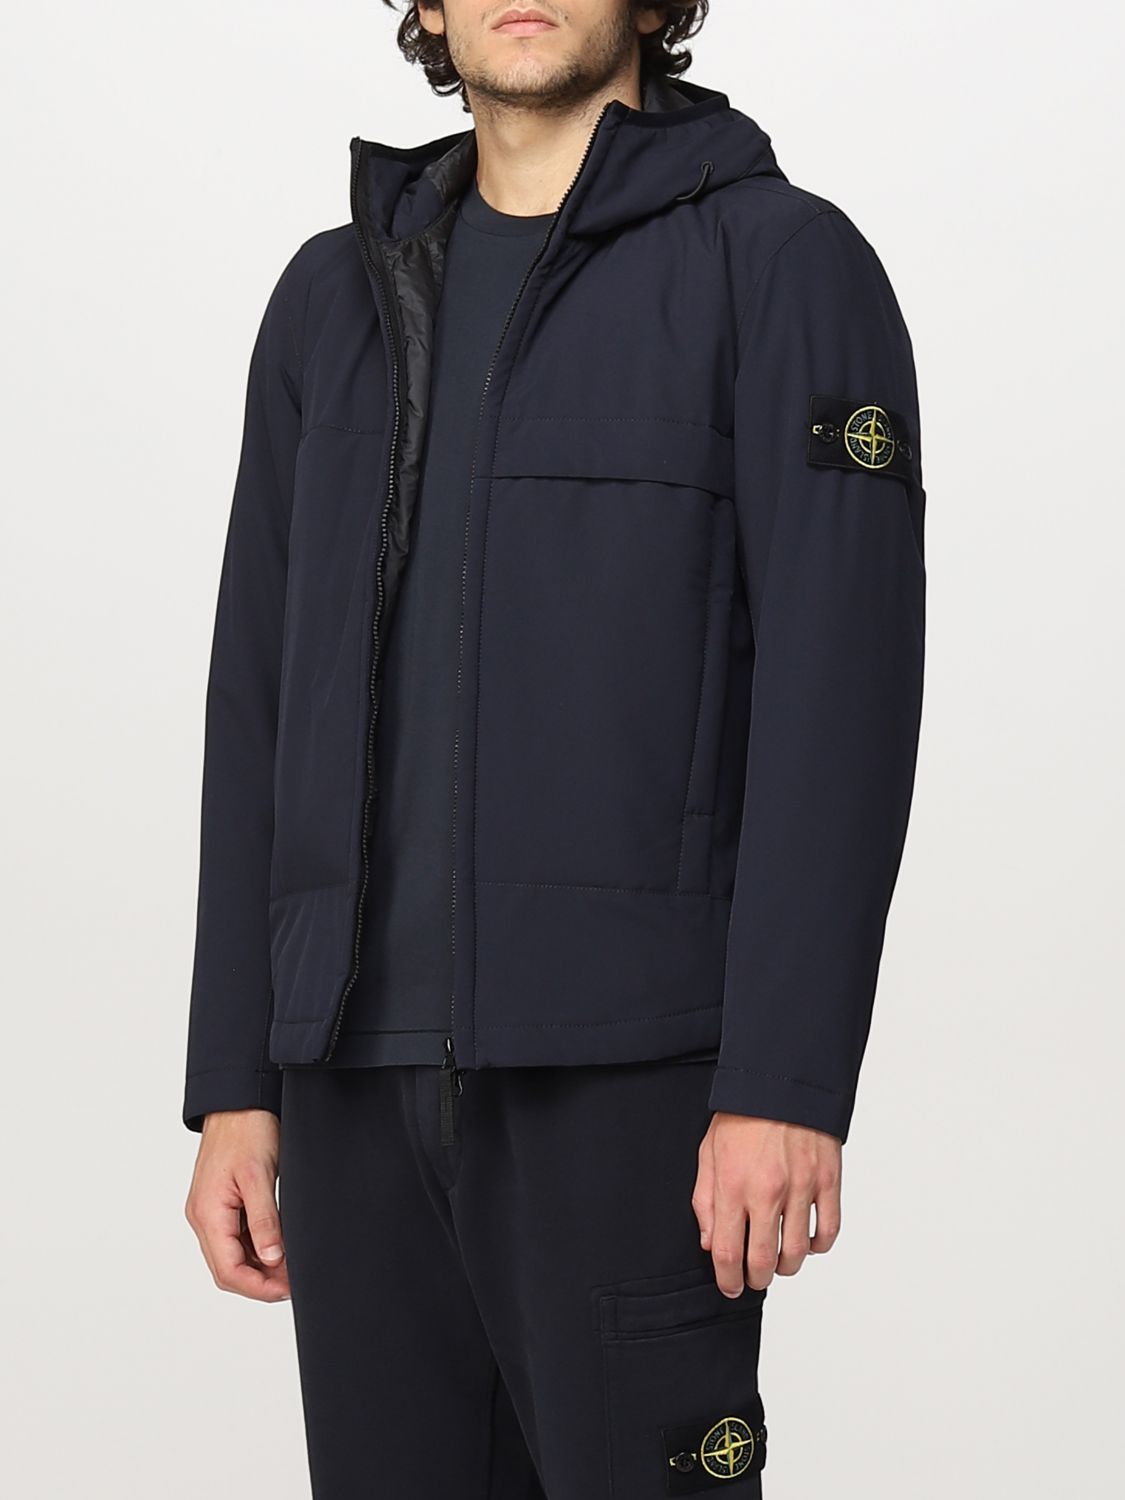 tempel ijs Opsplitsen Stone Island Outlet: jacket for man - Navy | Stone Island jacket 40527  online on GIGLIO.COM